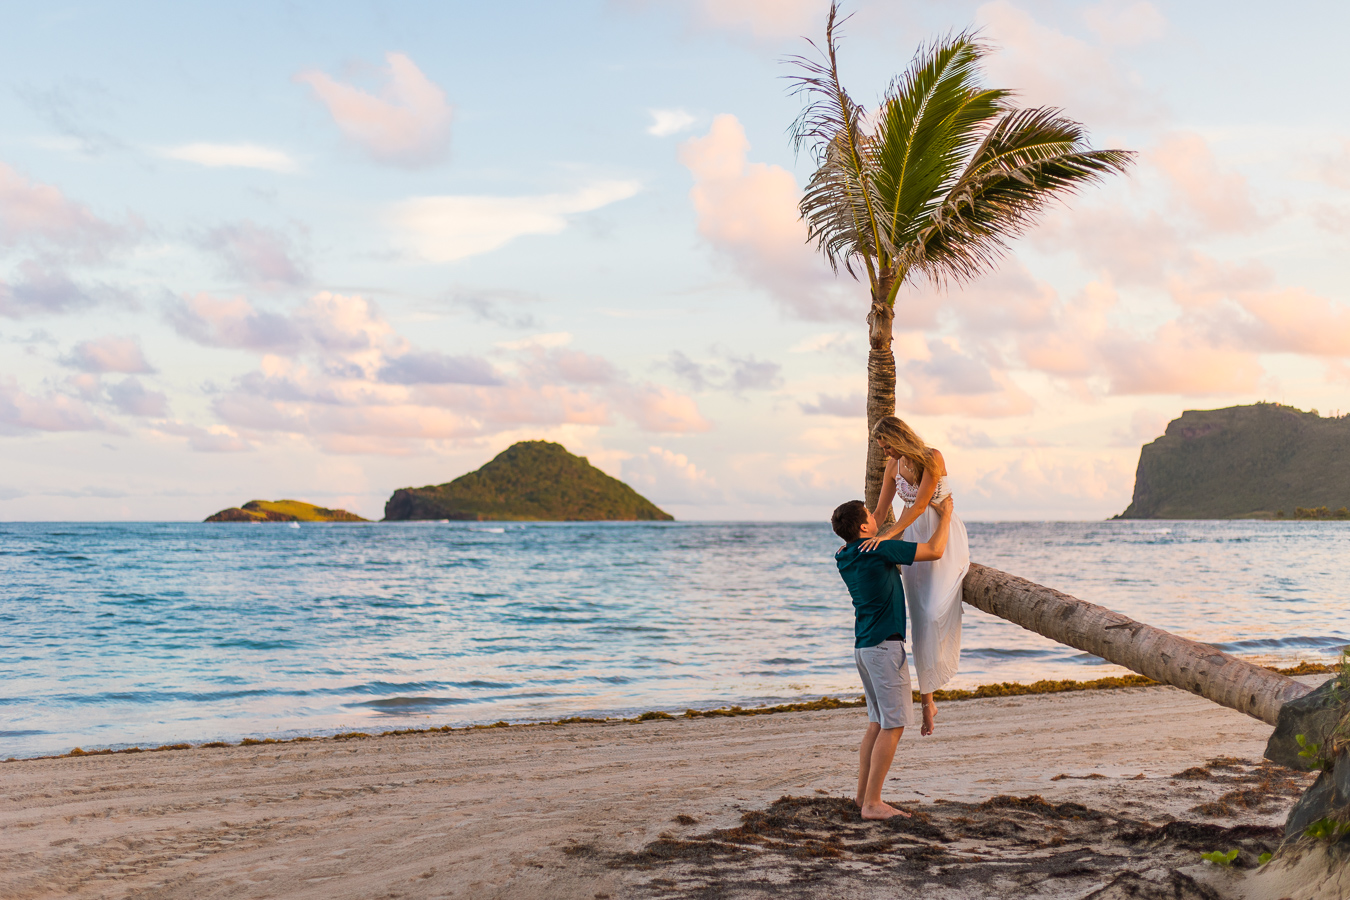 A groom helps his bride down from a palm tree during their tropical elopement so that she doesn't wreck her elopement dress